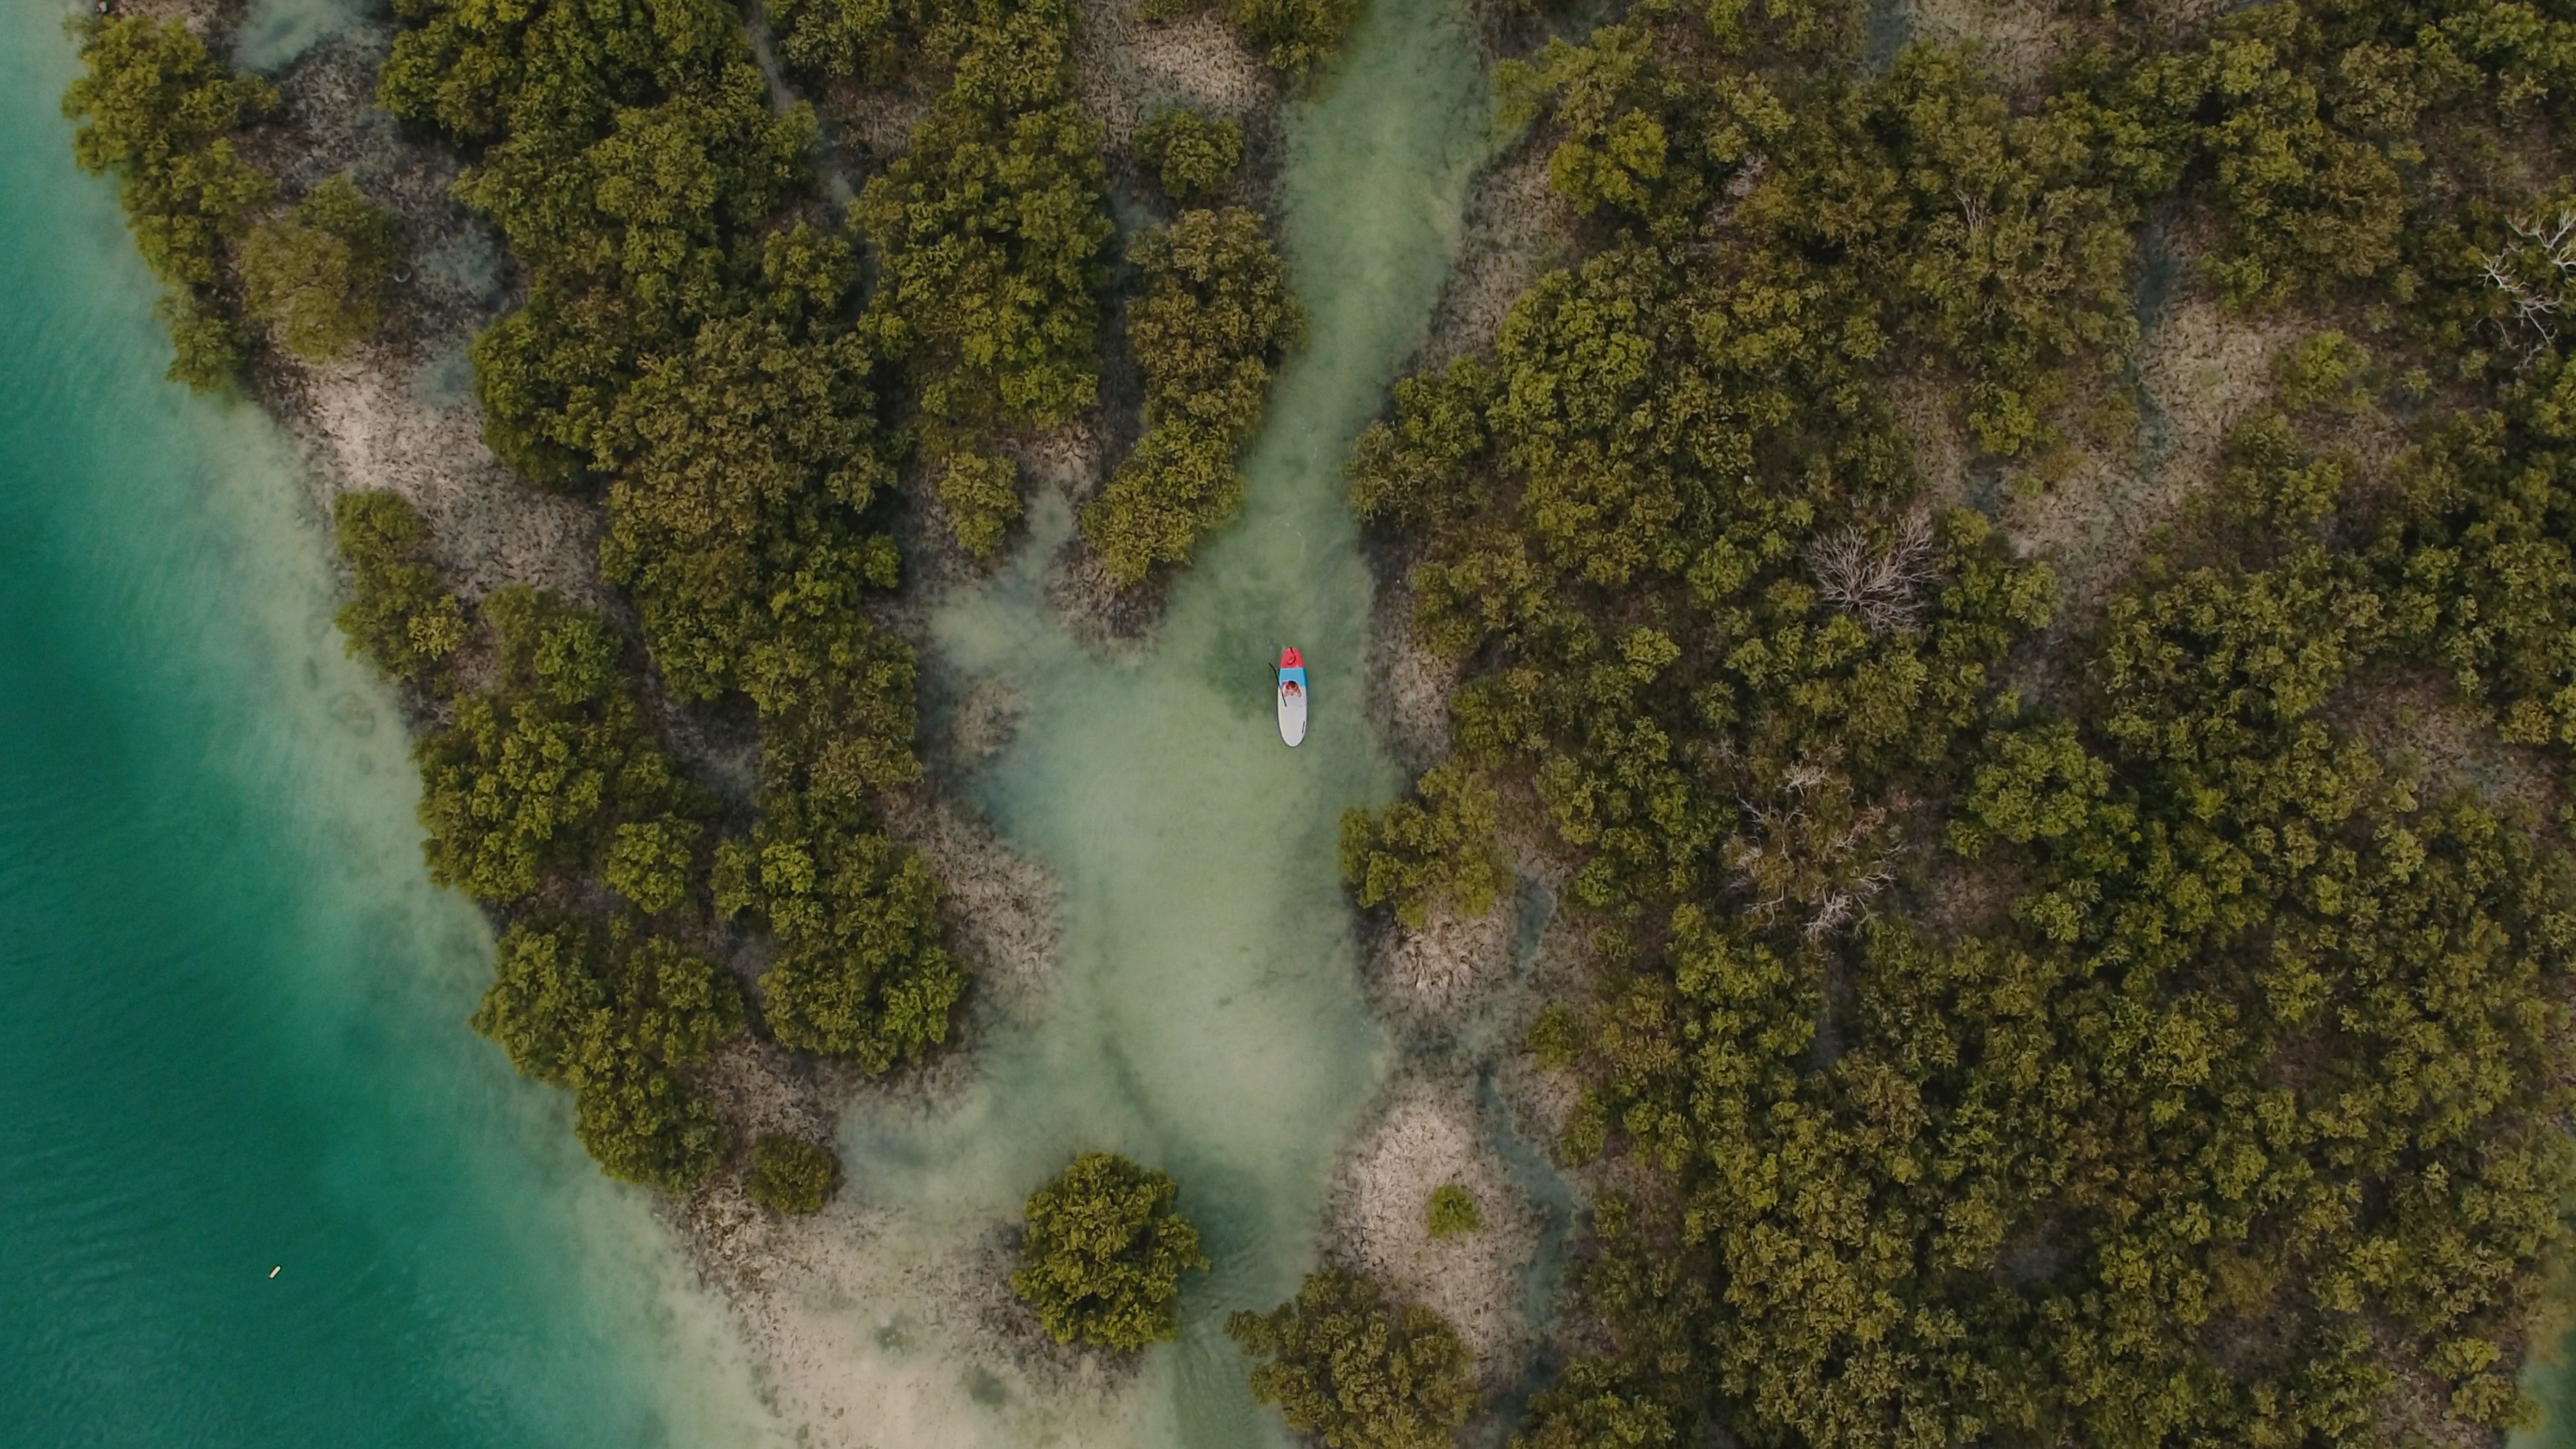 Bird's eye view of a kayak amidst mangrove trees in a marine protected area in Abu Dhabi